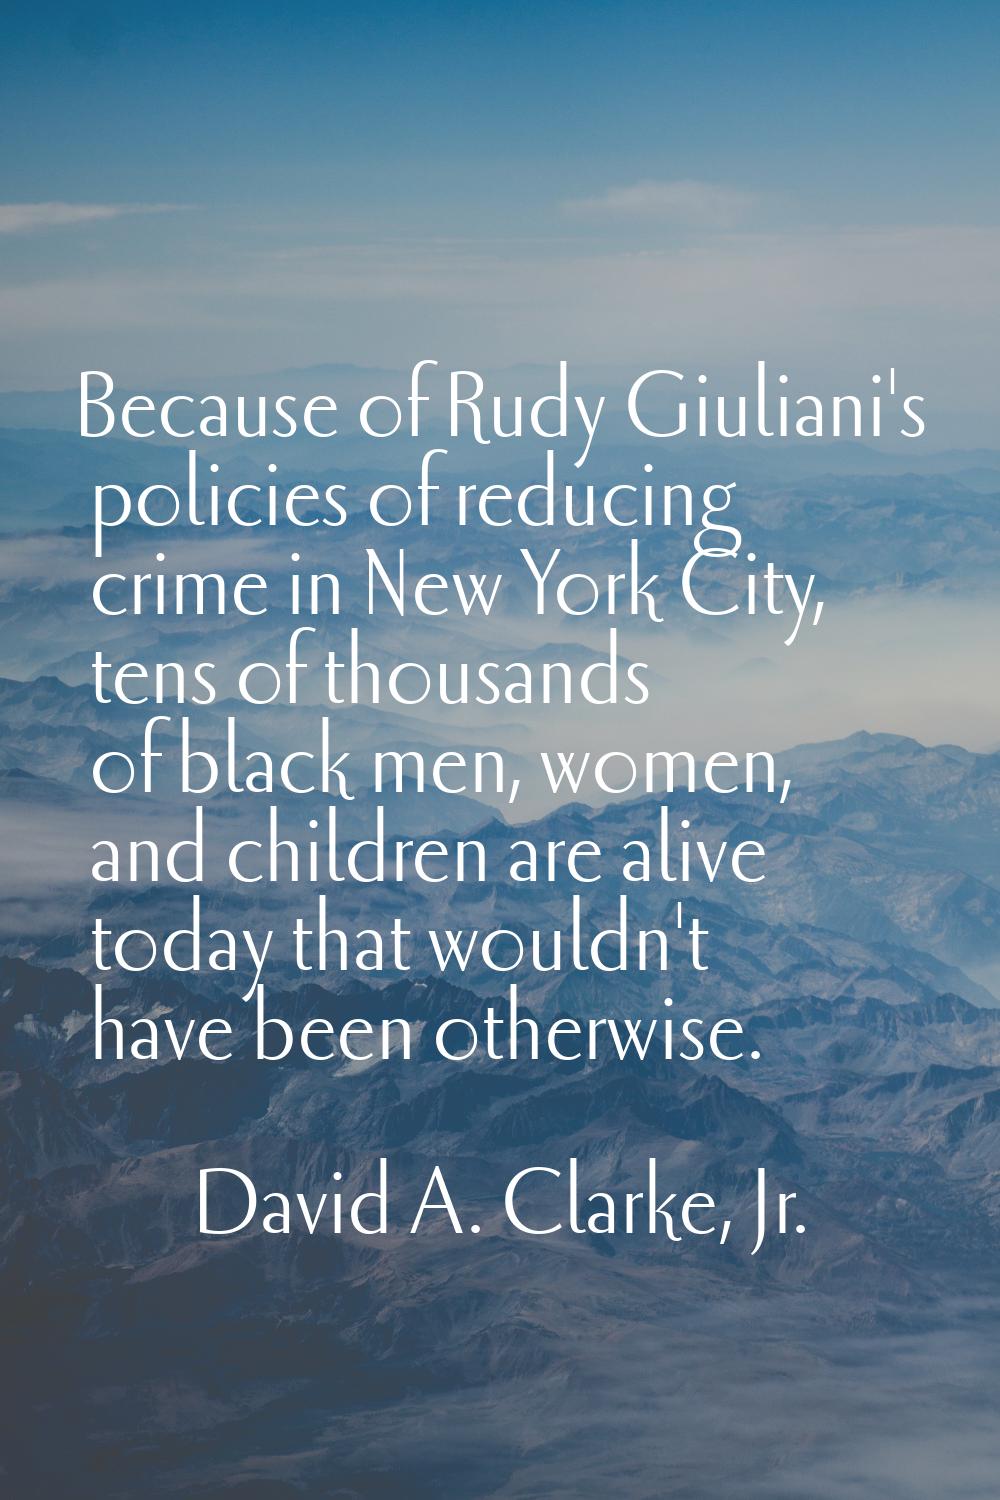 Because of Rudy Giuliani's policies of reducing crime in New York City, tens of thousands of black 